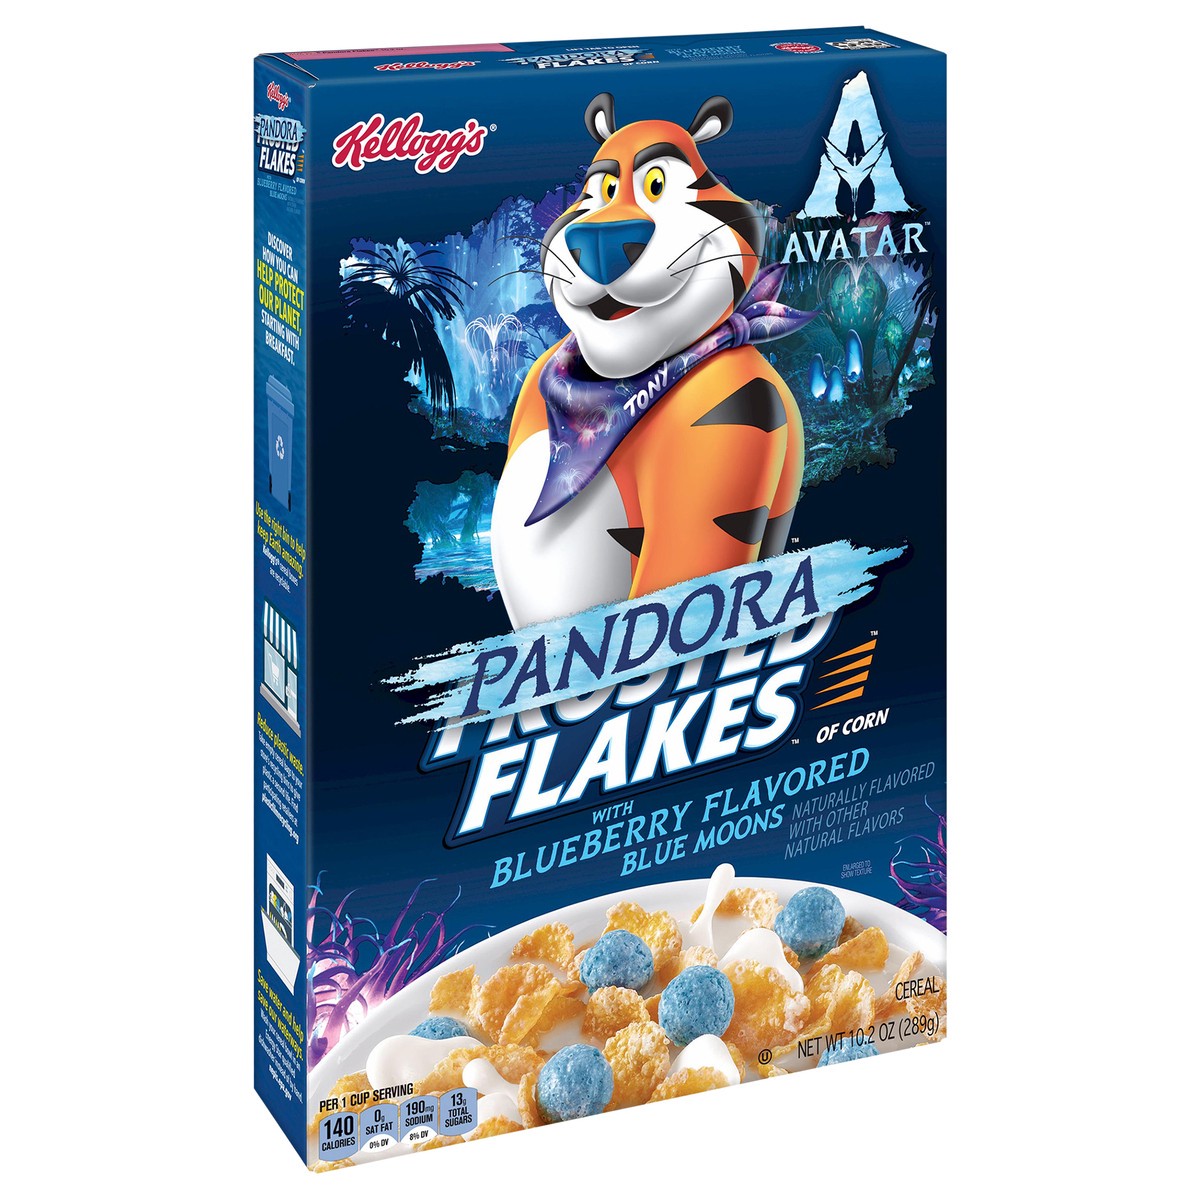 slide 9 of 10, Frosted Flakes Kellogg's Frosted Flakes Avatar Breakfast Cereal, Pandora Cereal, Kids Snacks, Original with Blueberry Flavored Blue Moons, 10.2oz, 1 Box, 10.2 oz